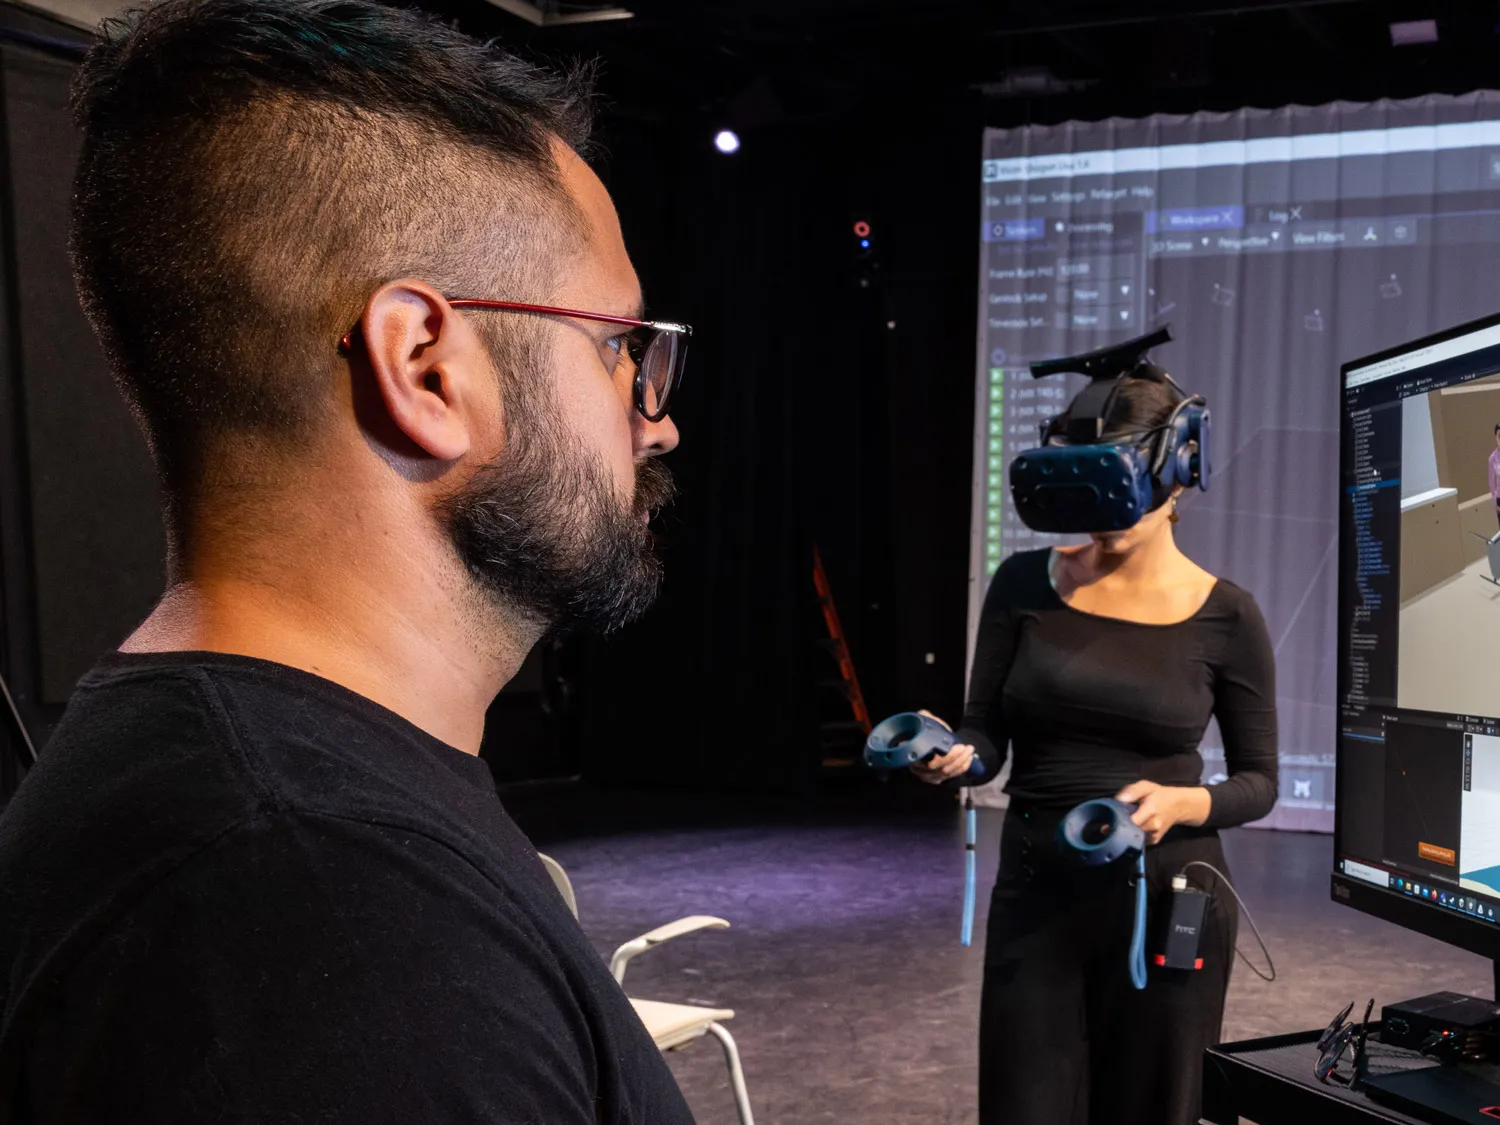 A man works on a computer whose screen shows a classroom setting while a woman on a stage beyond him wears a virtual reality headset and sensors used for motion capture. Ultimately, her movement will be shown on the screen he works on. 